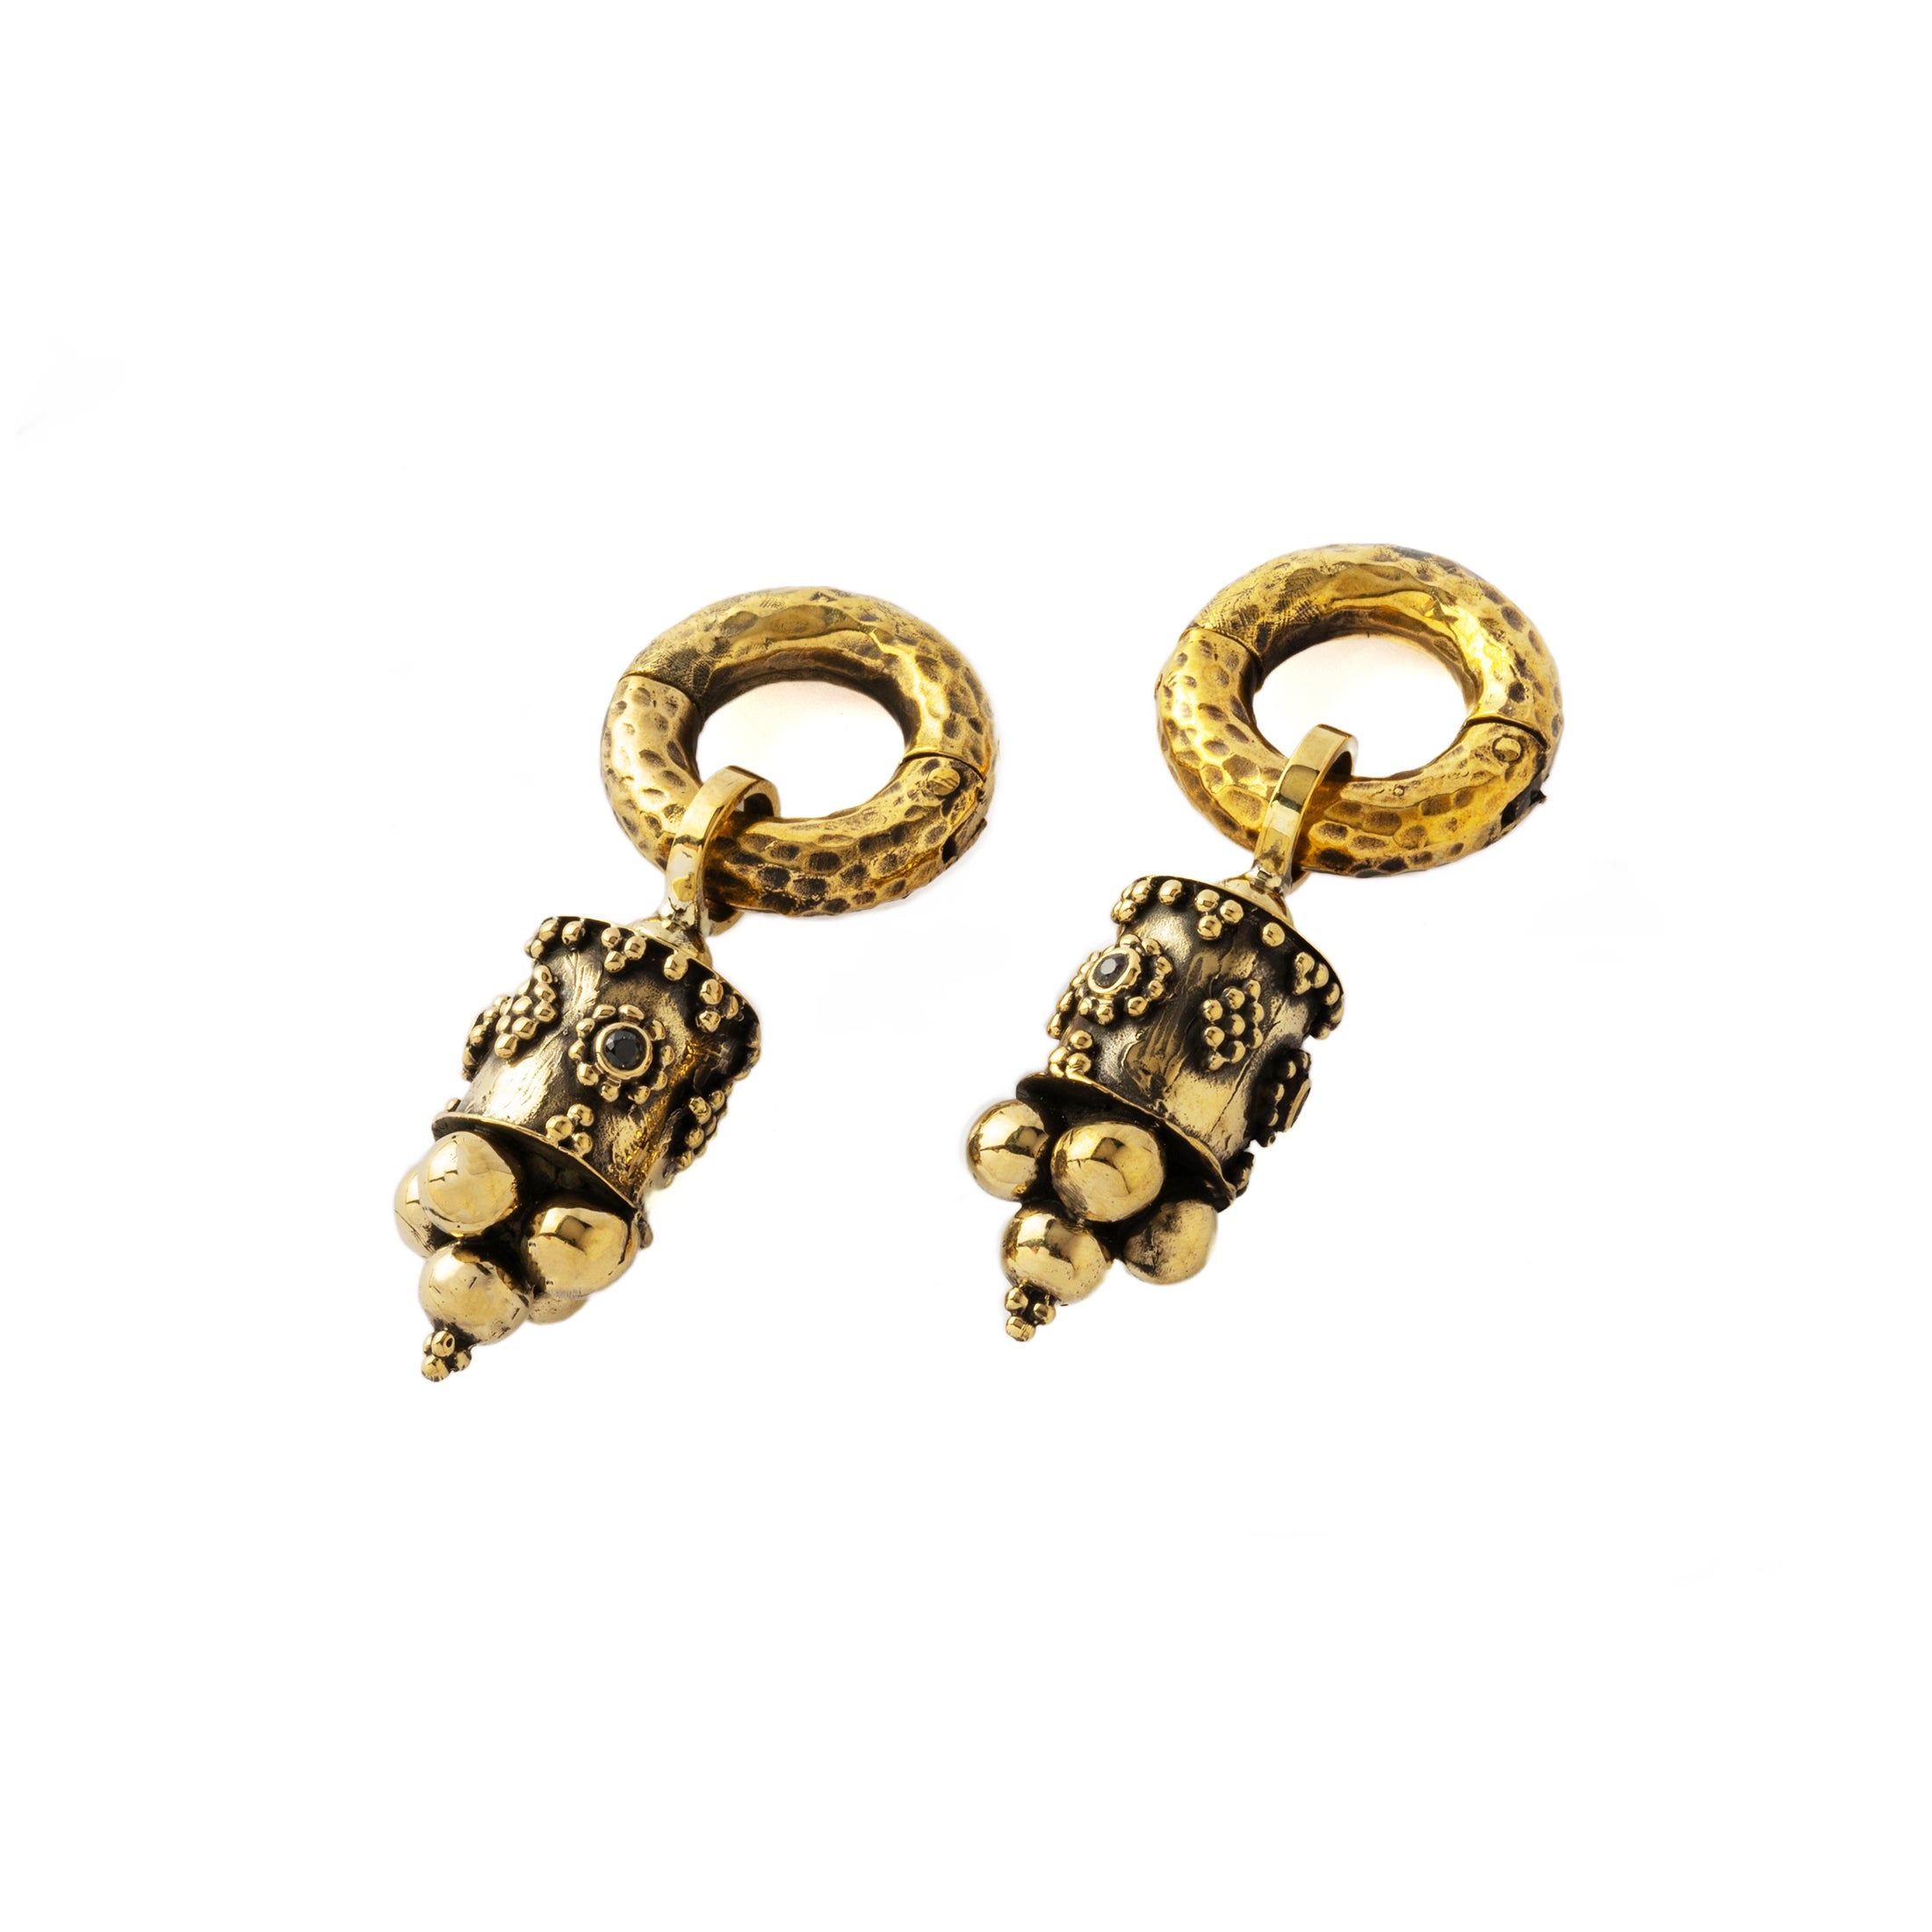 Afghan Ear Weights with Spinel